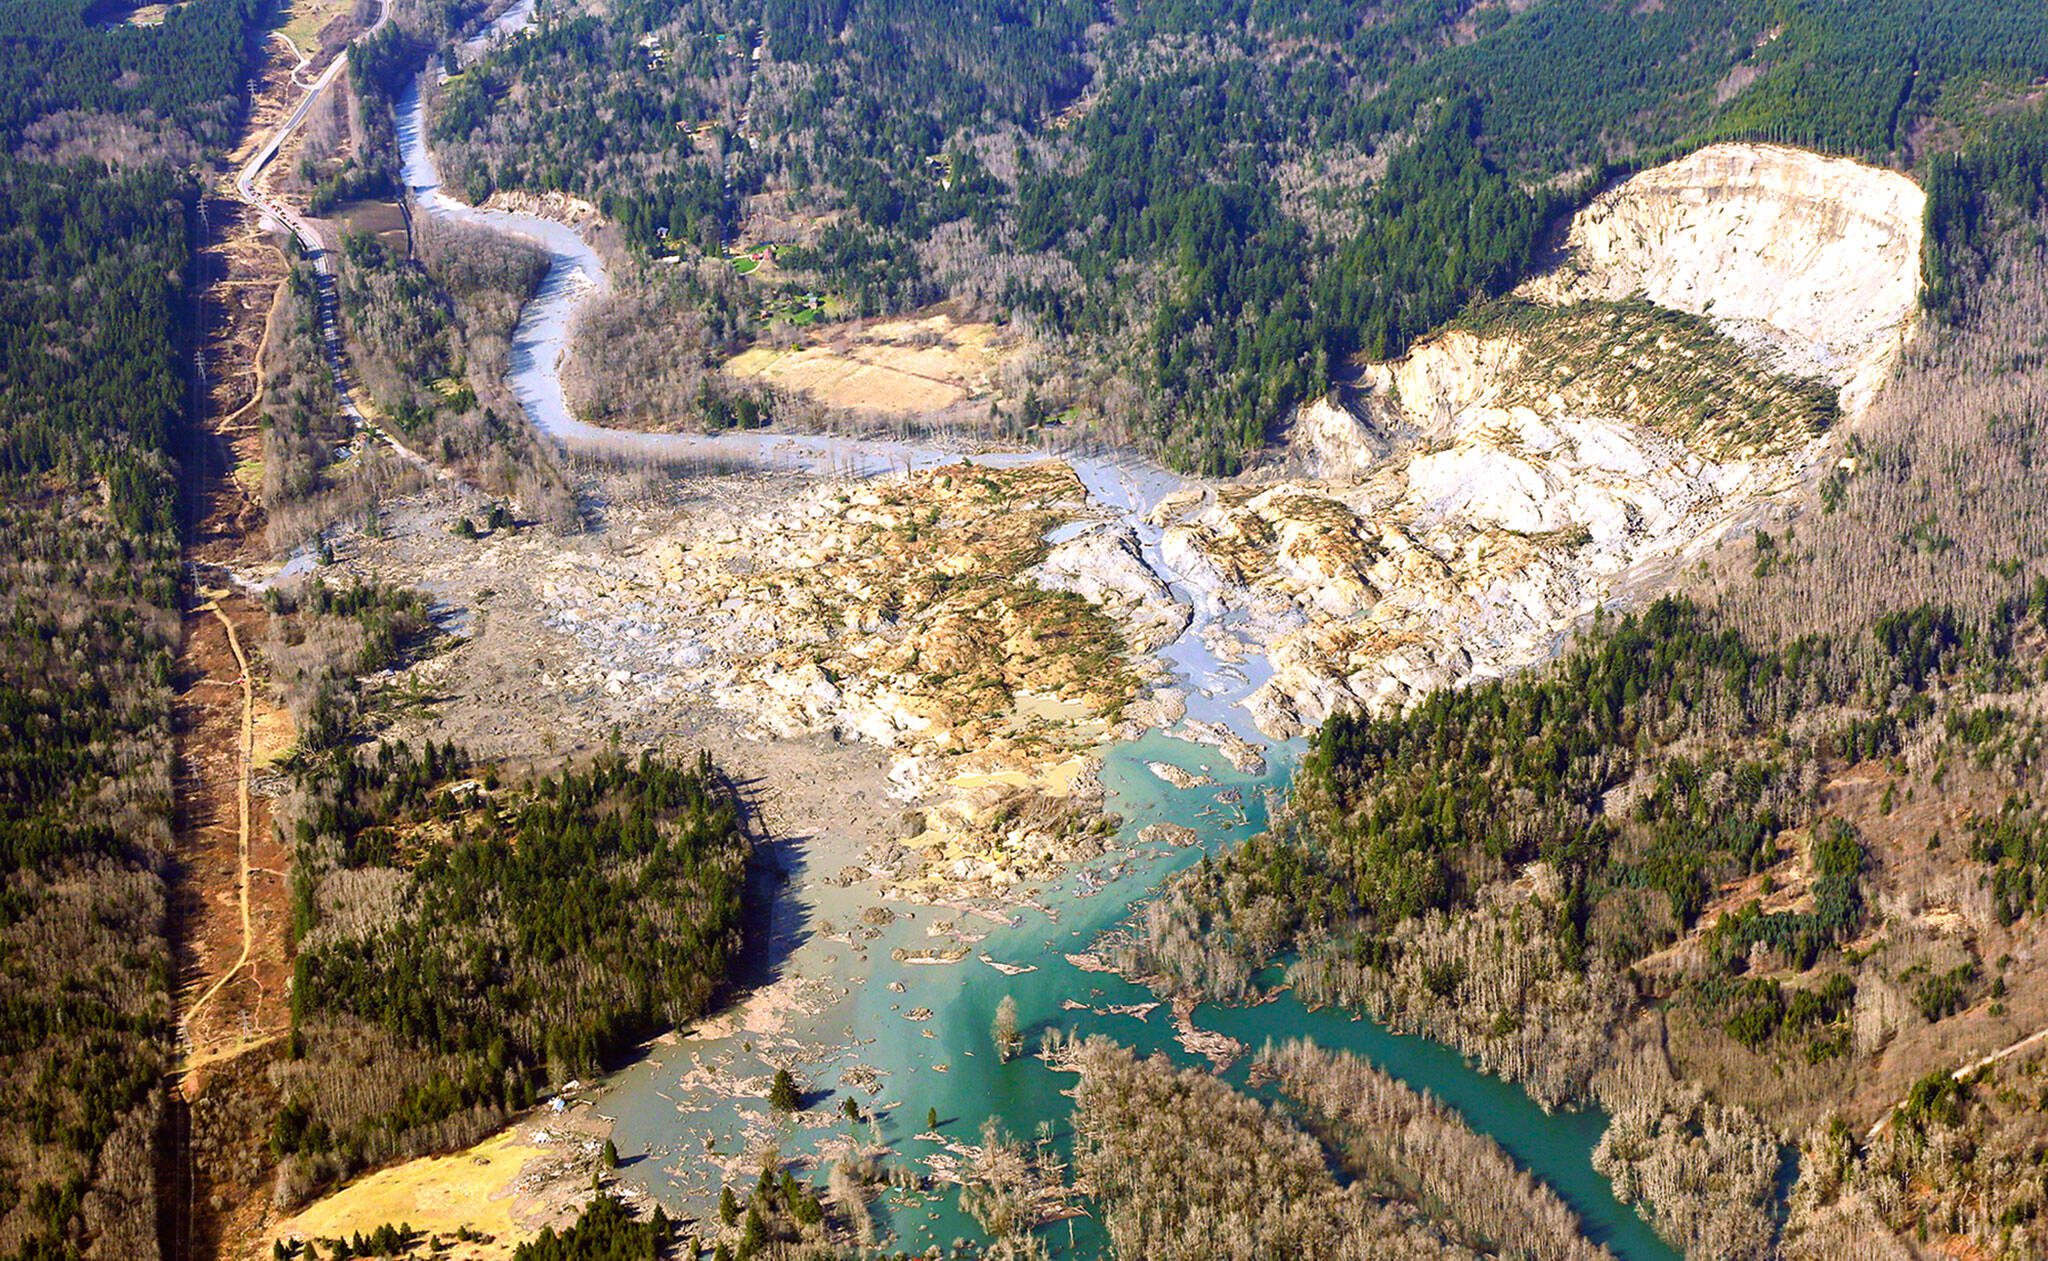 The massive slide that killed 43 people is shown in a 2014 aerial photo taken two days after it occurred near Oso, Washington. (AP Photo/Ted S. Warren)